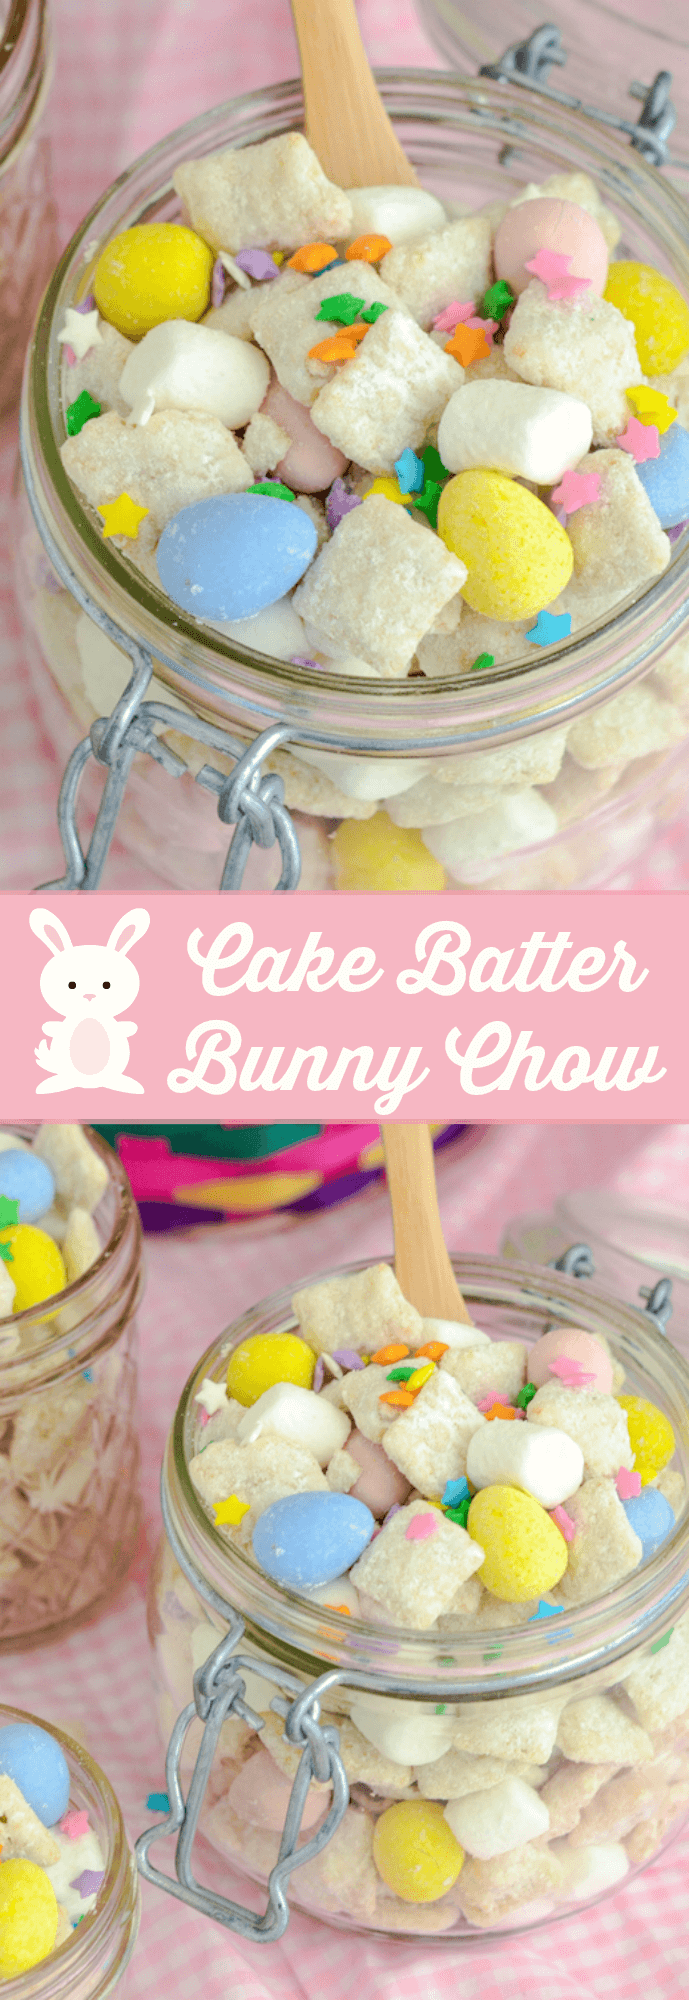 Cake Batter Bunny Chow!